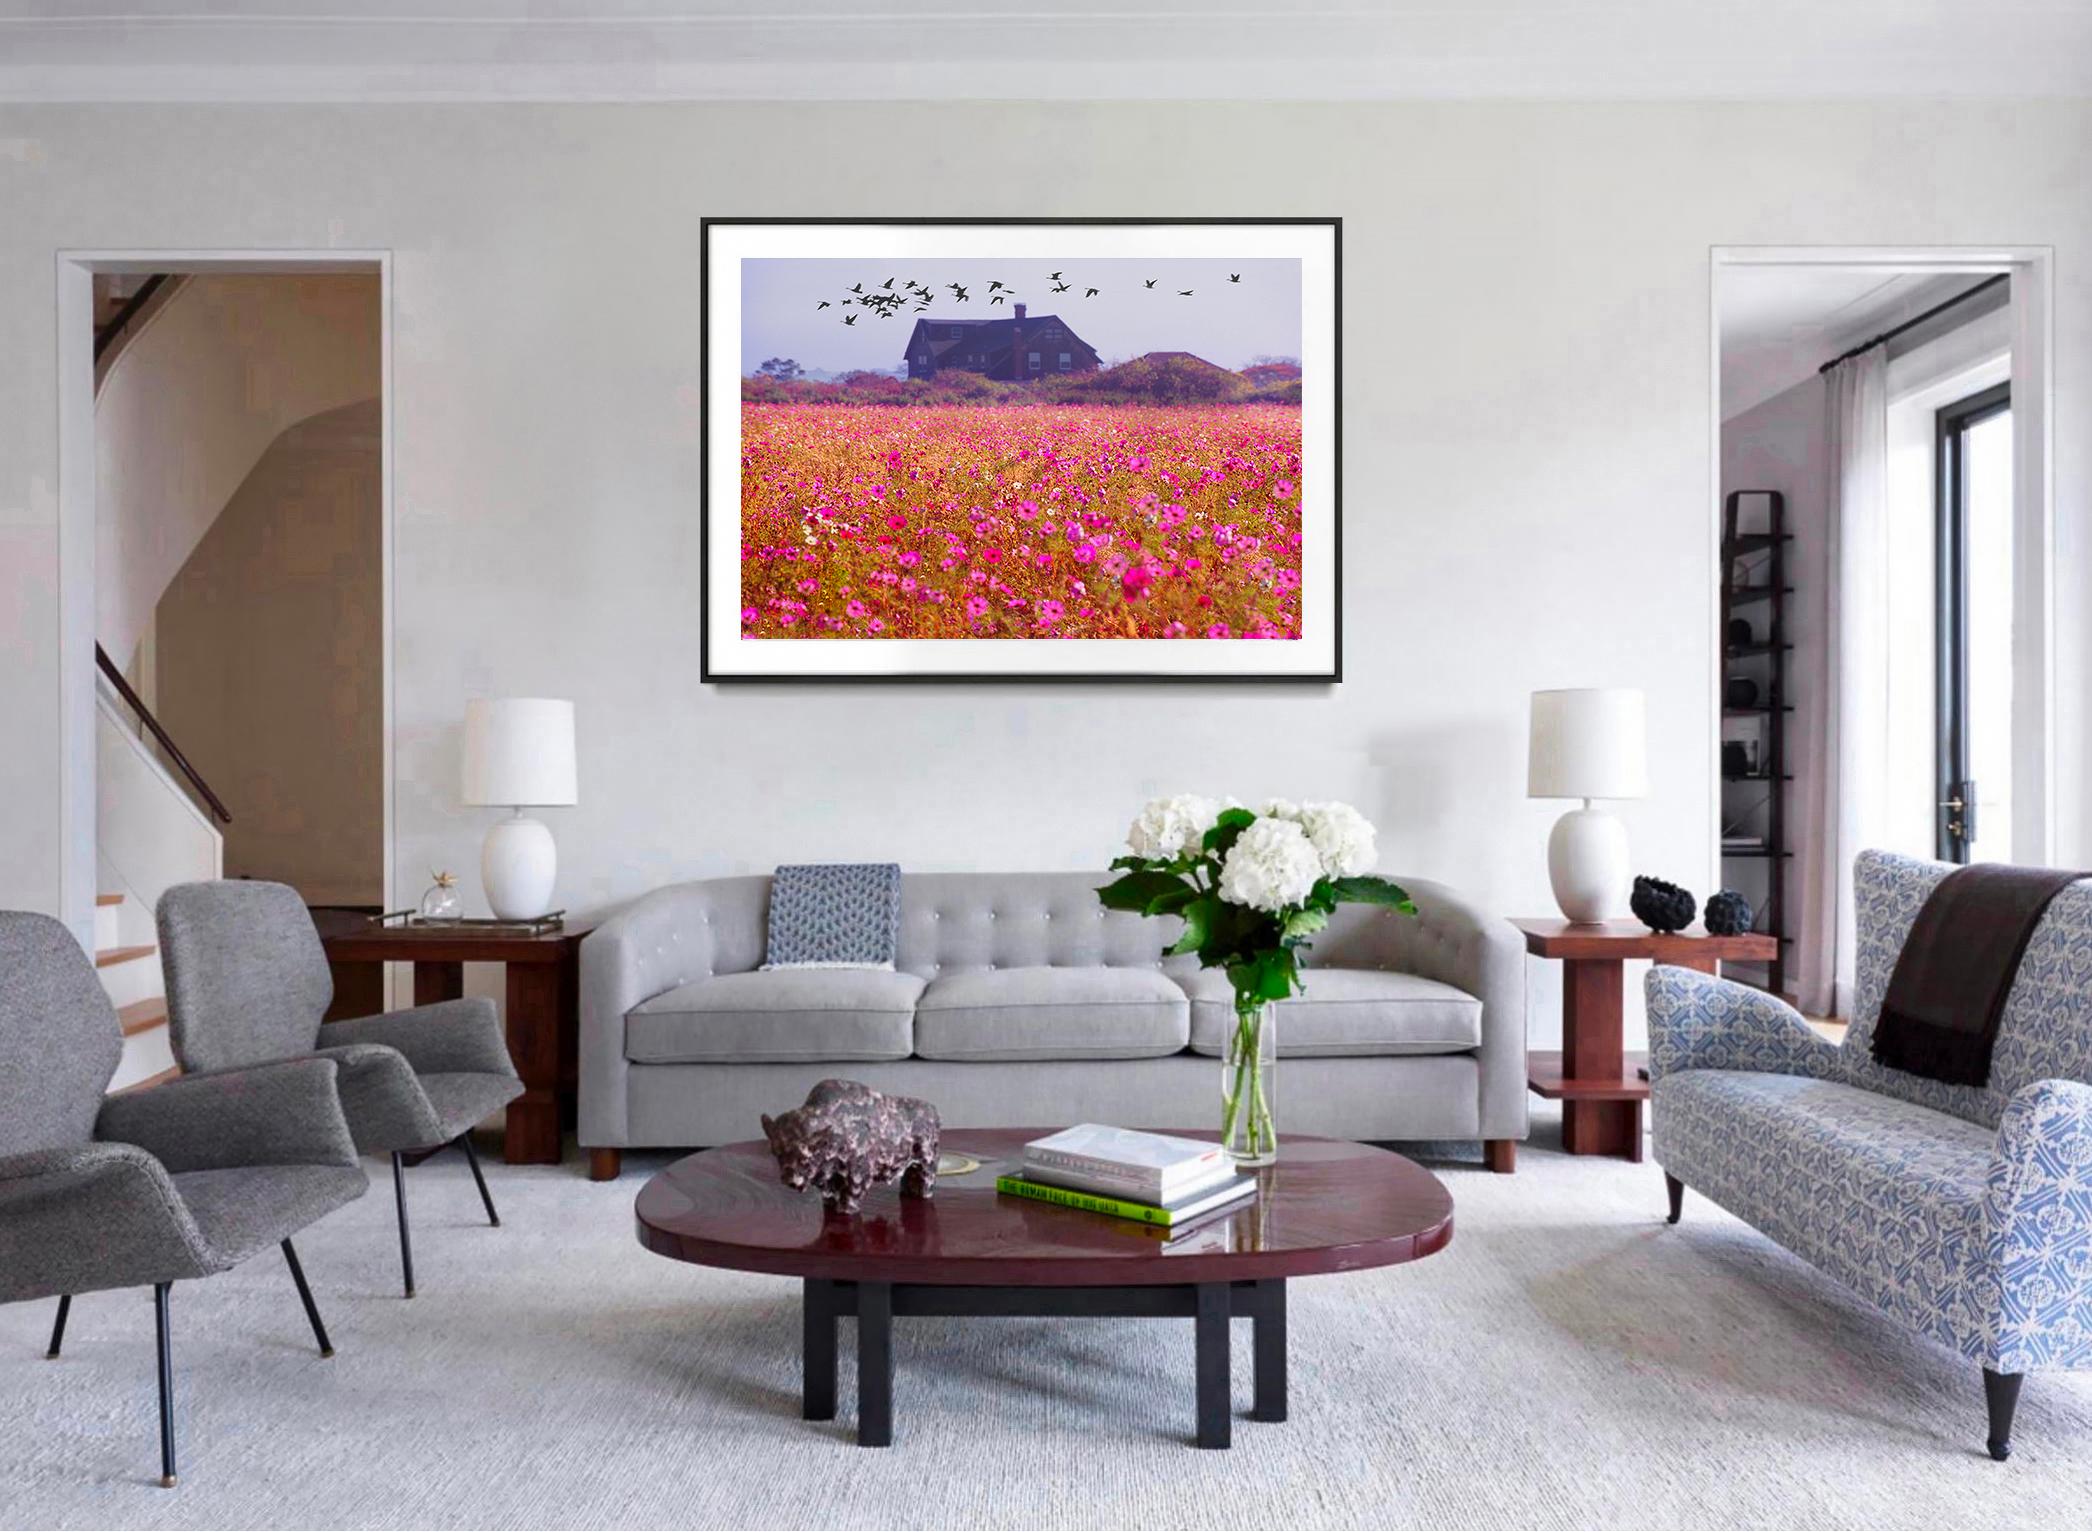 East Hampton Landscape with Field of Pink Flowers and Migrating Birds Monet - Post-Impressionist Photograph by Mitchell Funk